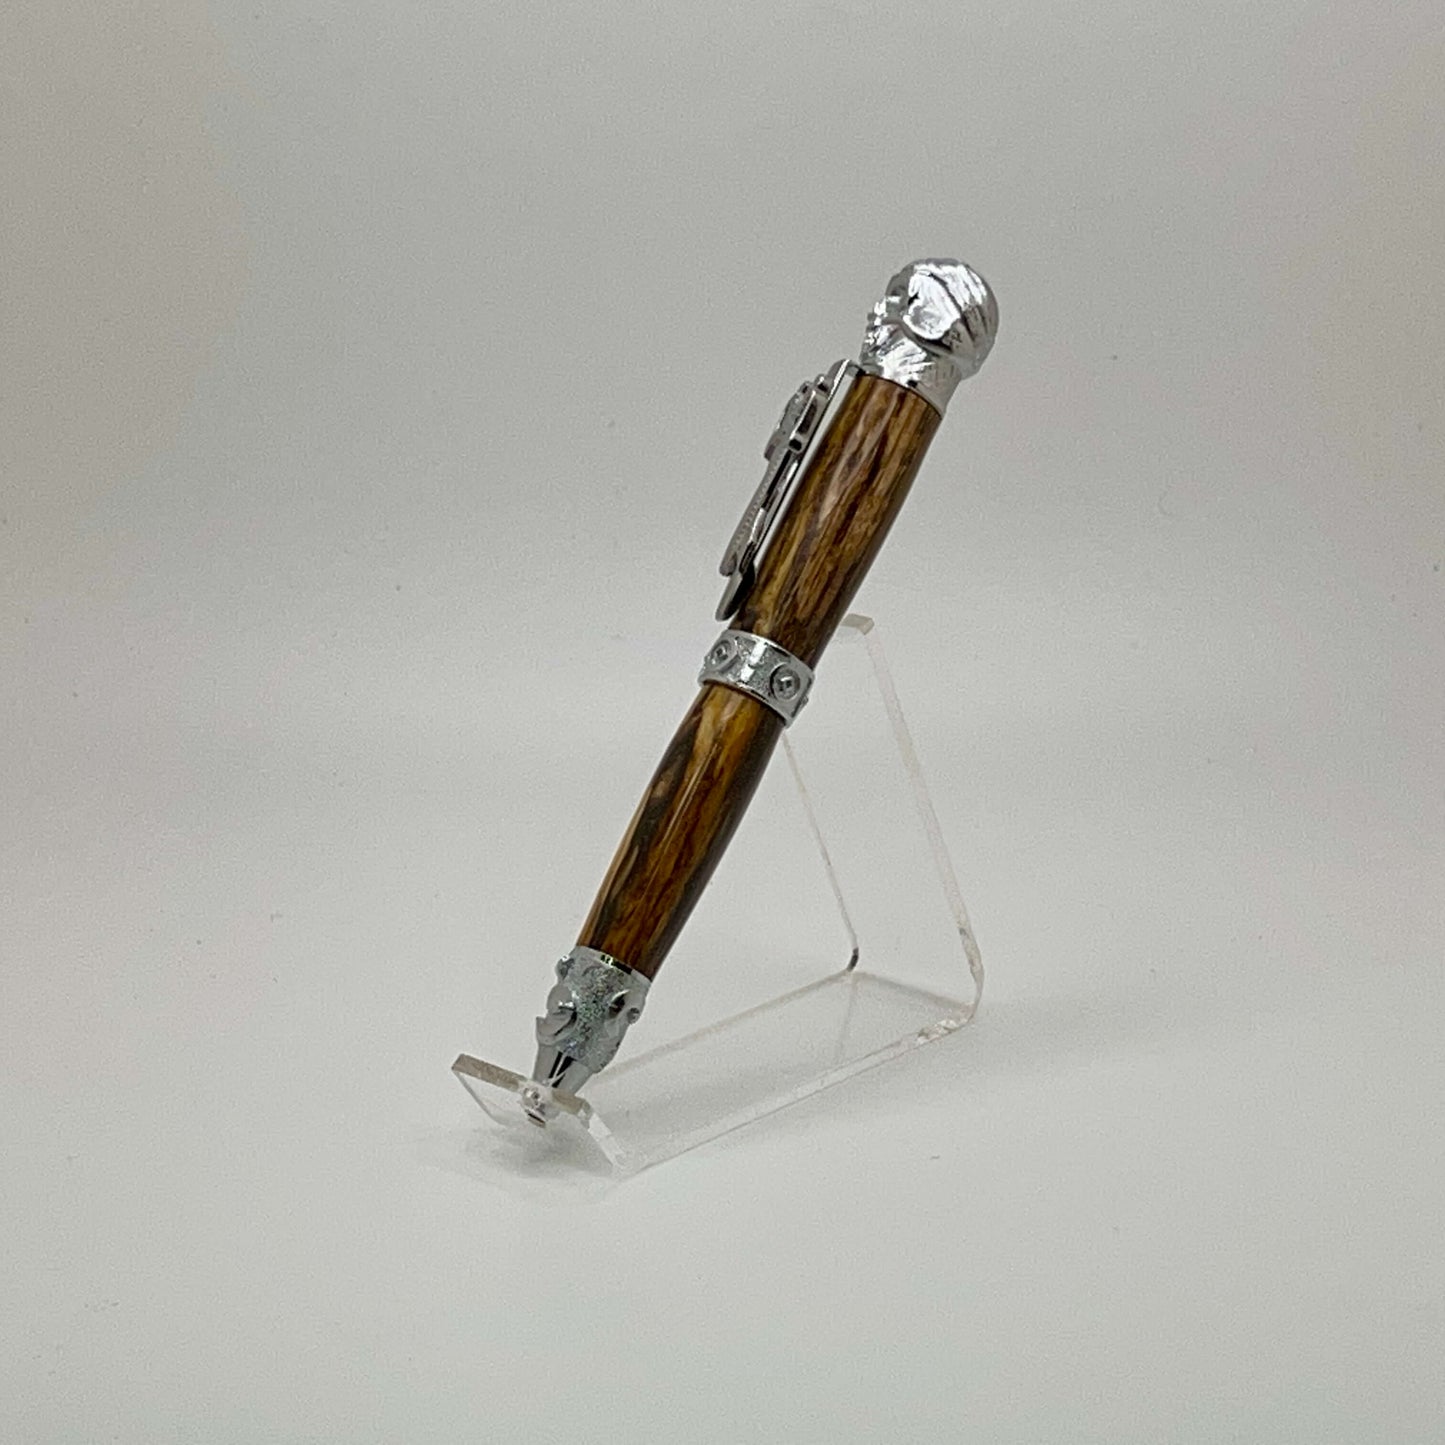 Pamlico Pirate Twist Pen In Chrome- A Treasure for Swashbuckling Adventurers